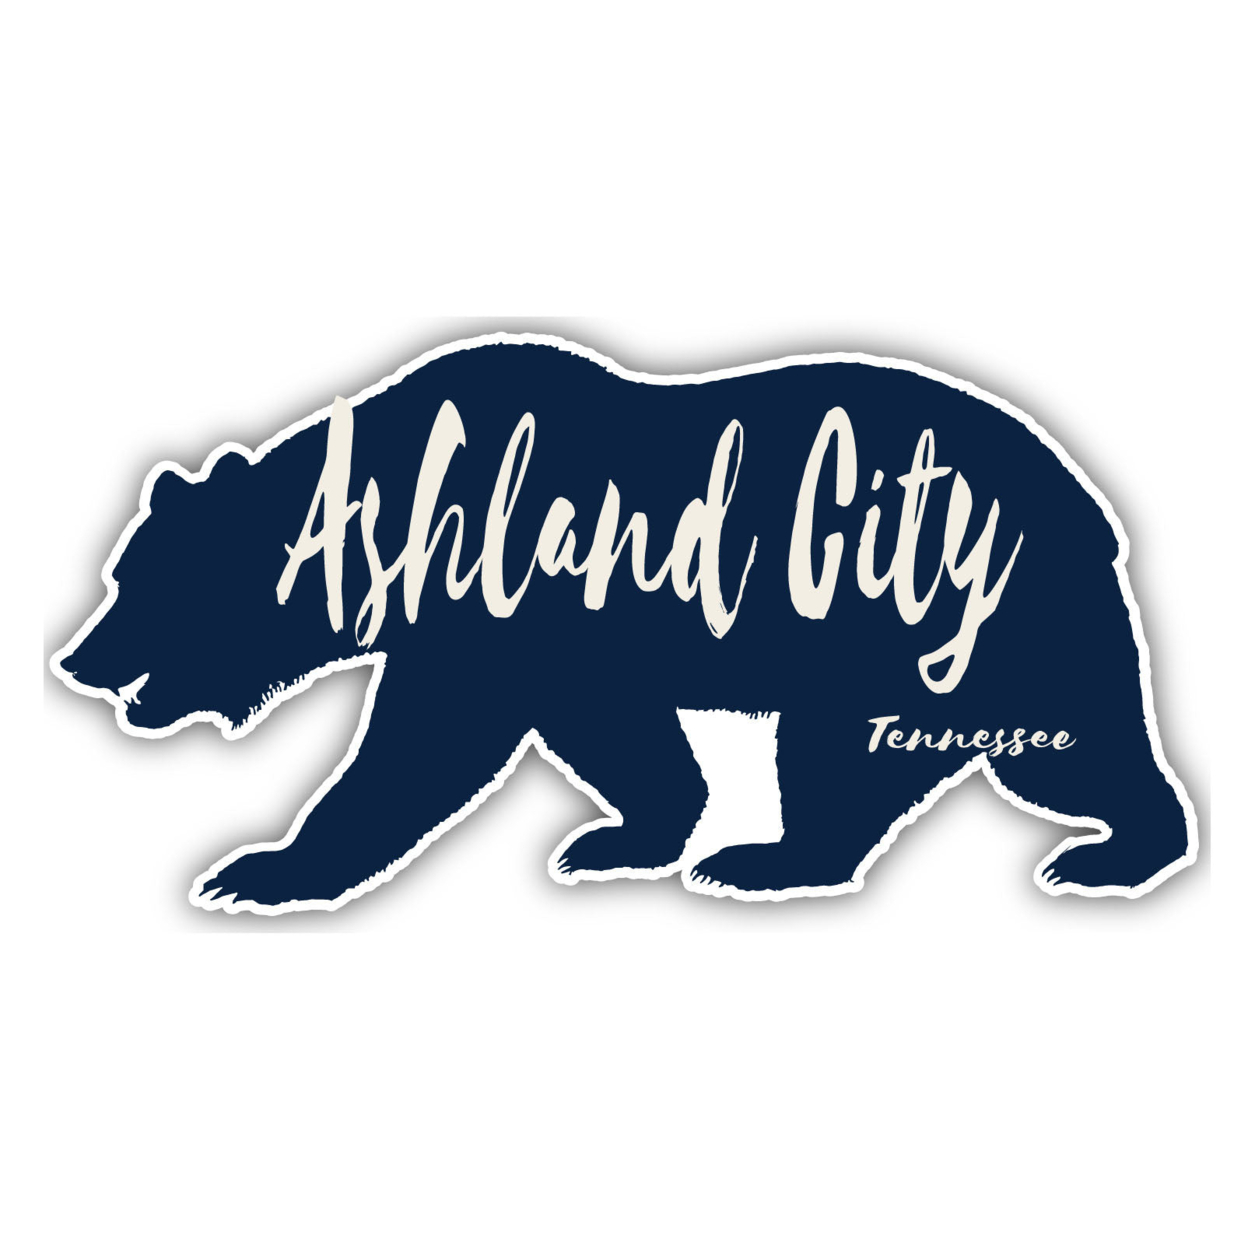 Ashland City Tennessee Souvenir Decorative Stickers (Choose Theme And Size) - 4-Pack, 10-Inch, Bear